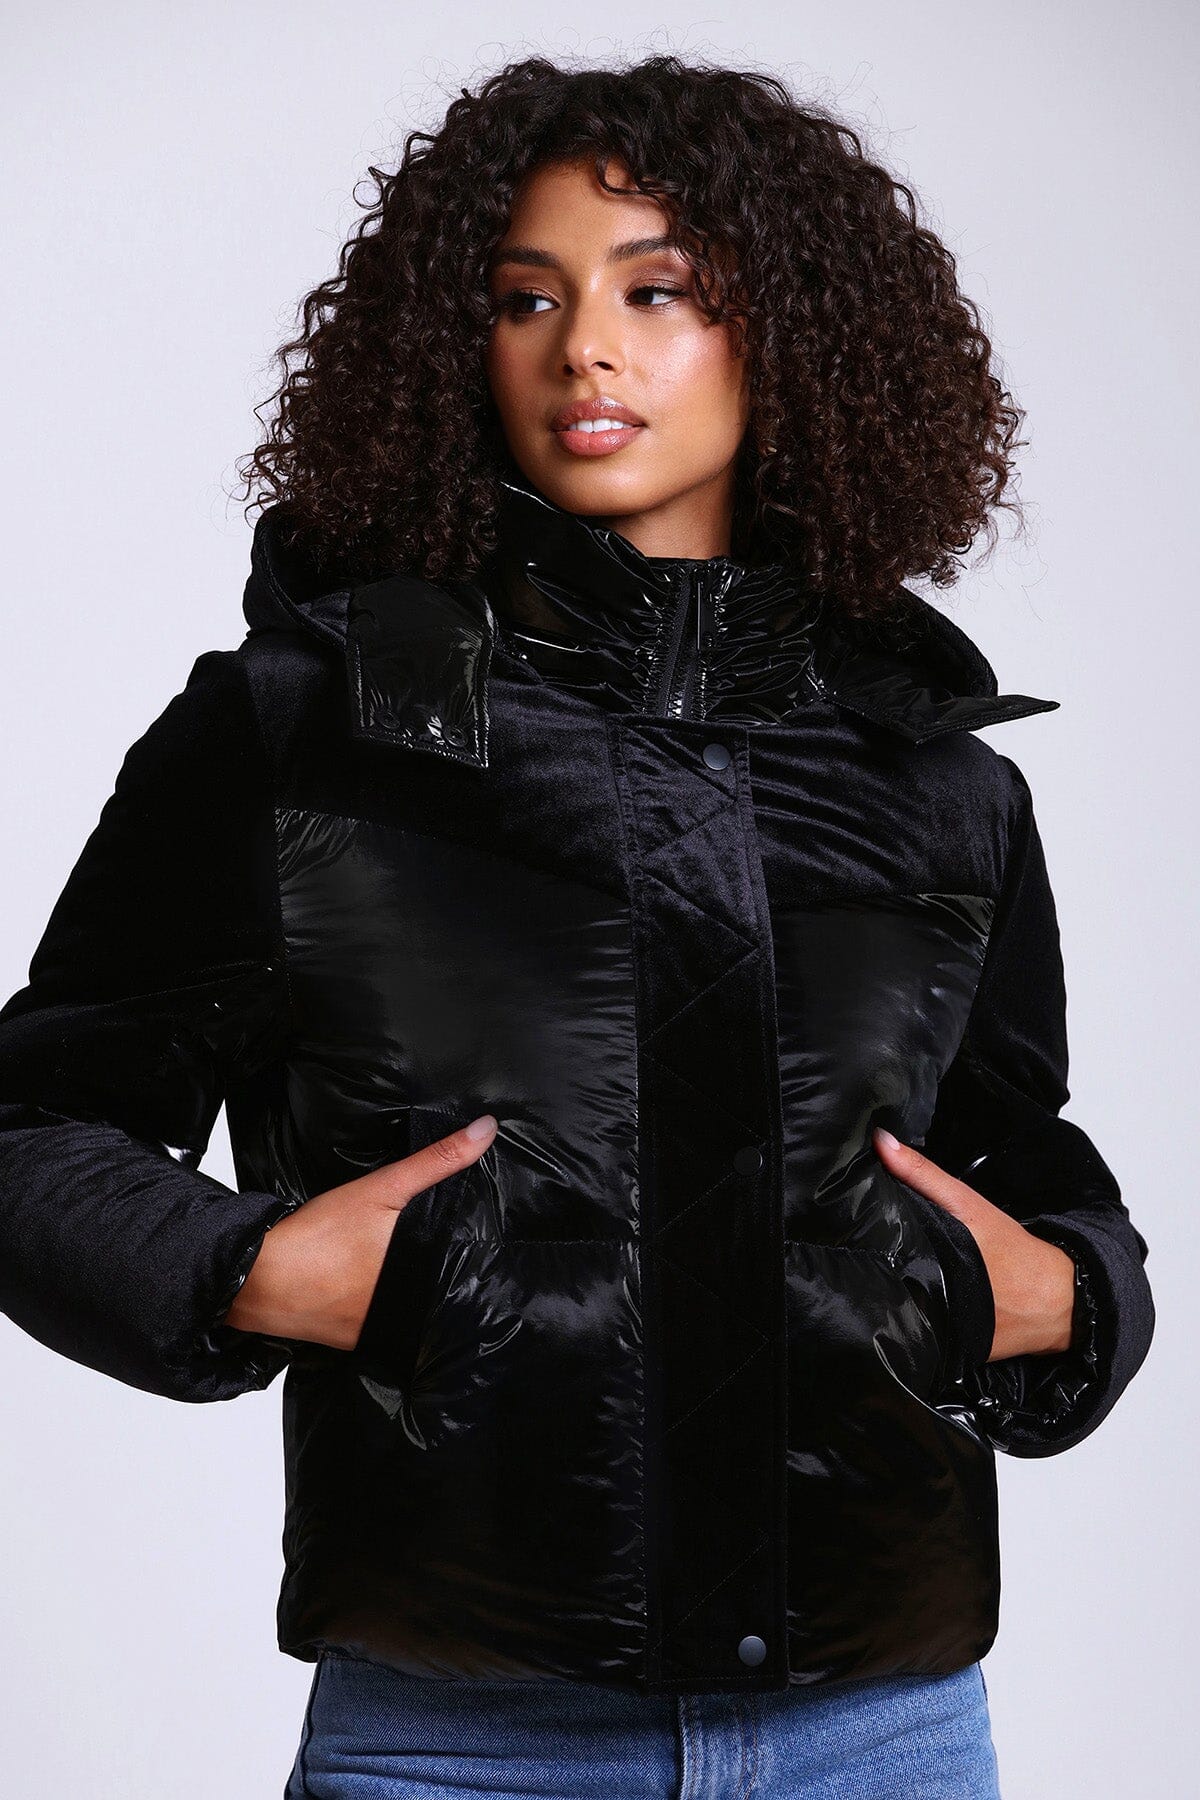 Black mixed media velvet puffer jacket coat - figure flattering day to night puffers coats jackets for ladies